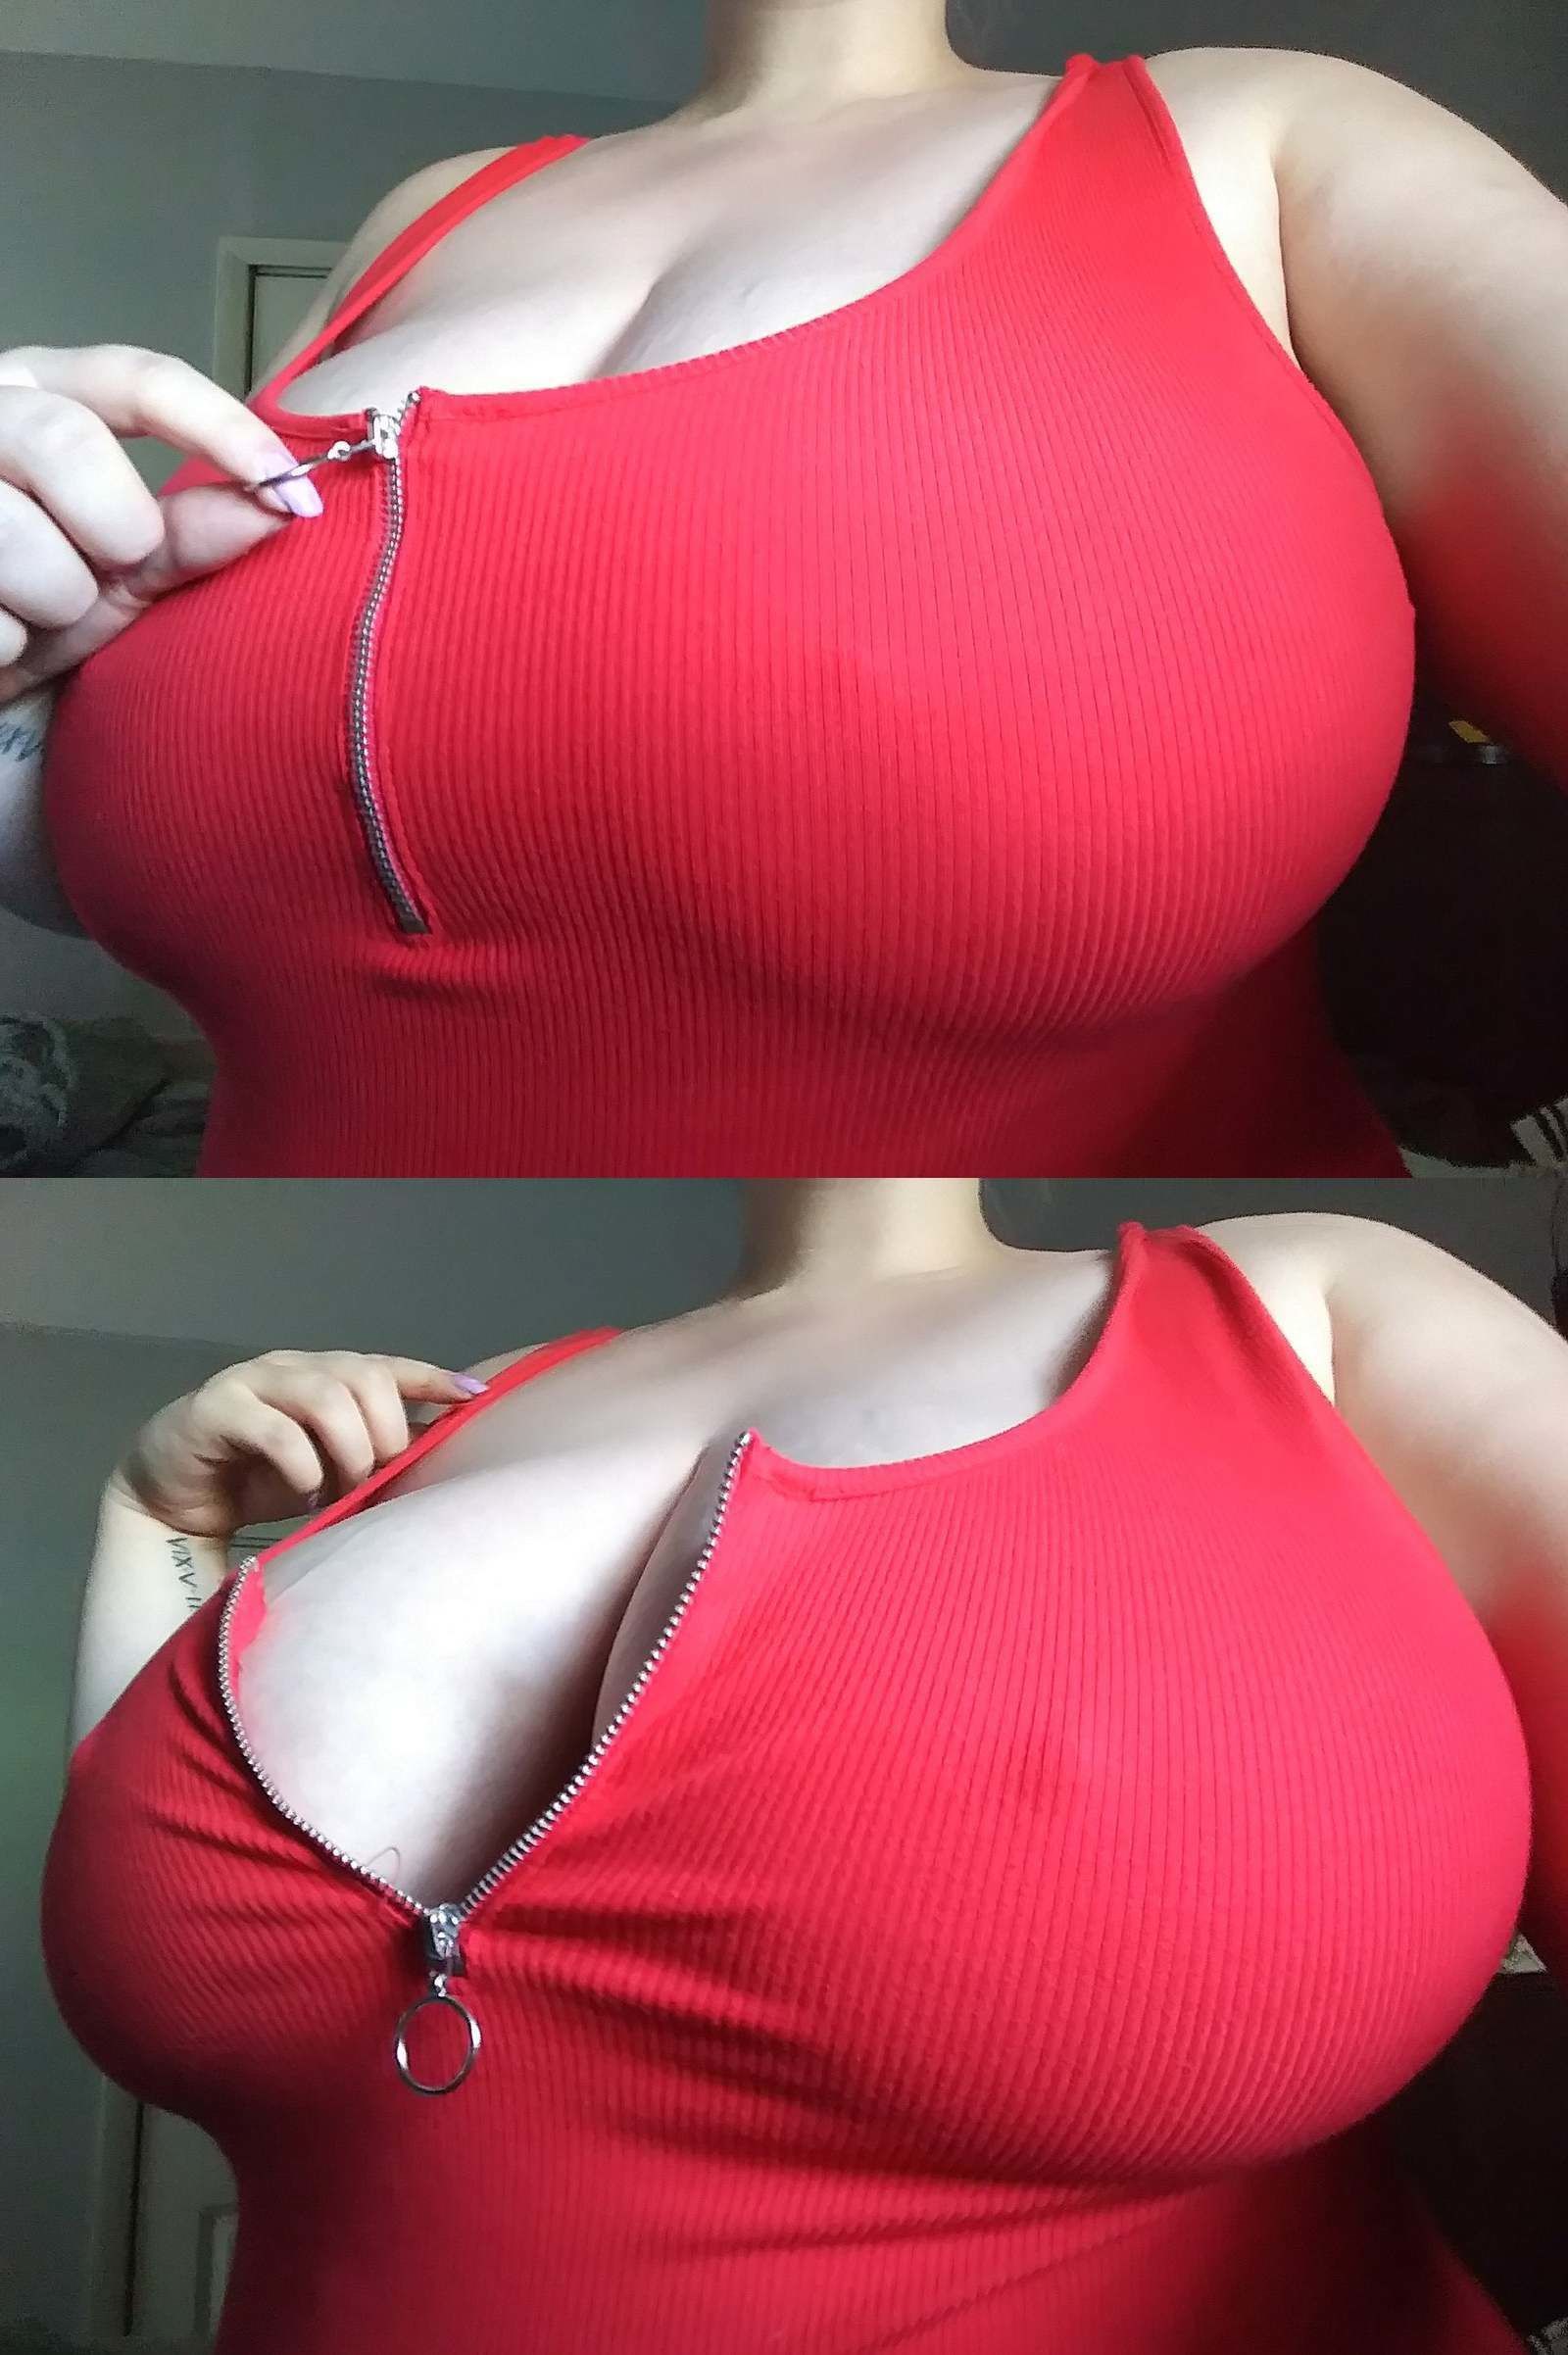 Show Me Your Huge Tits